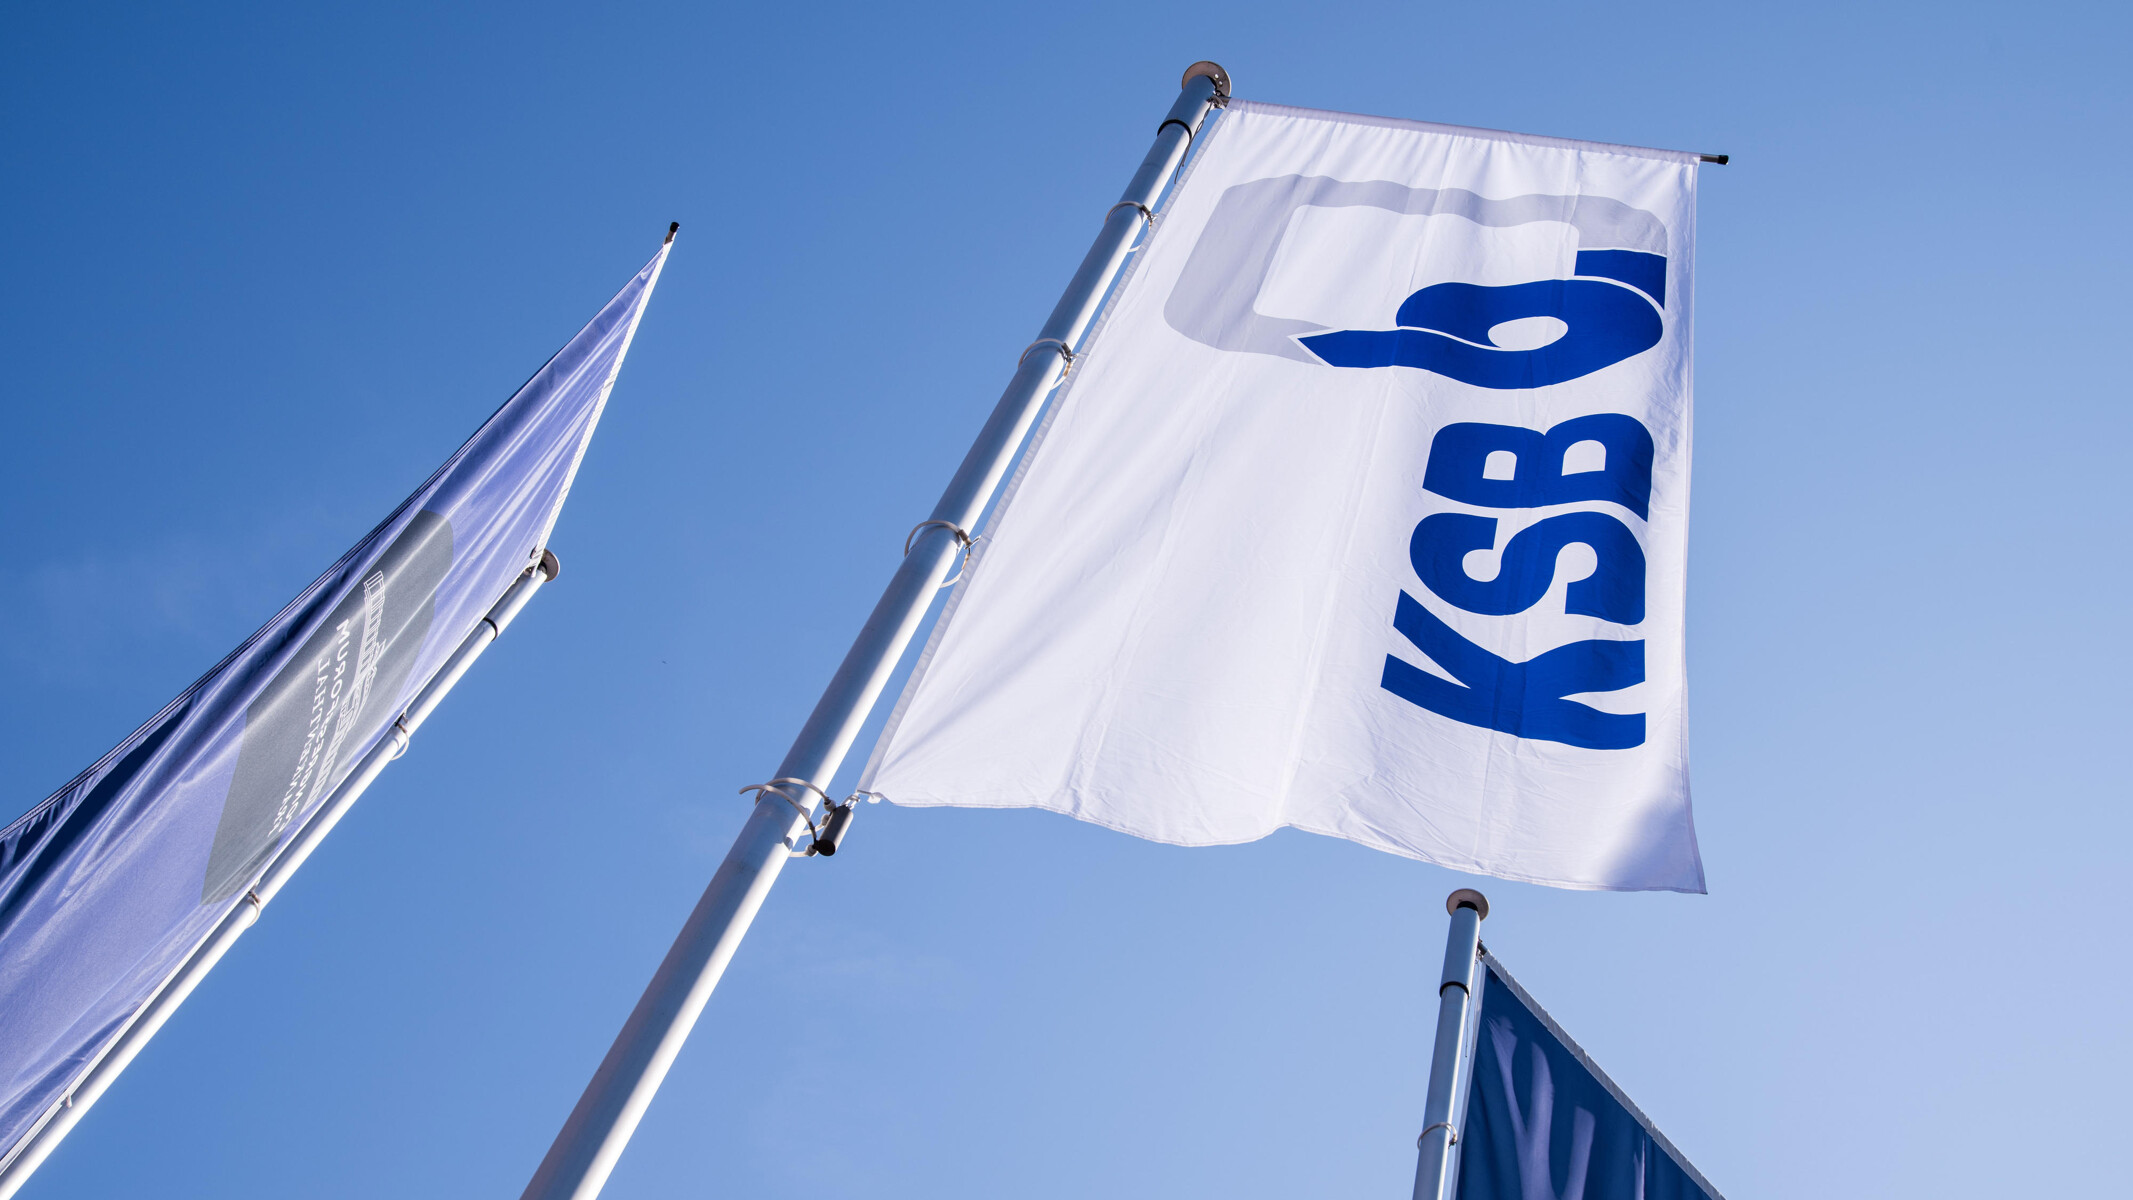 KSB flags and blue sky